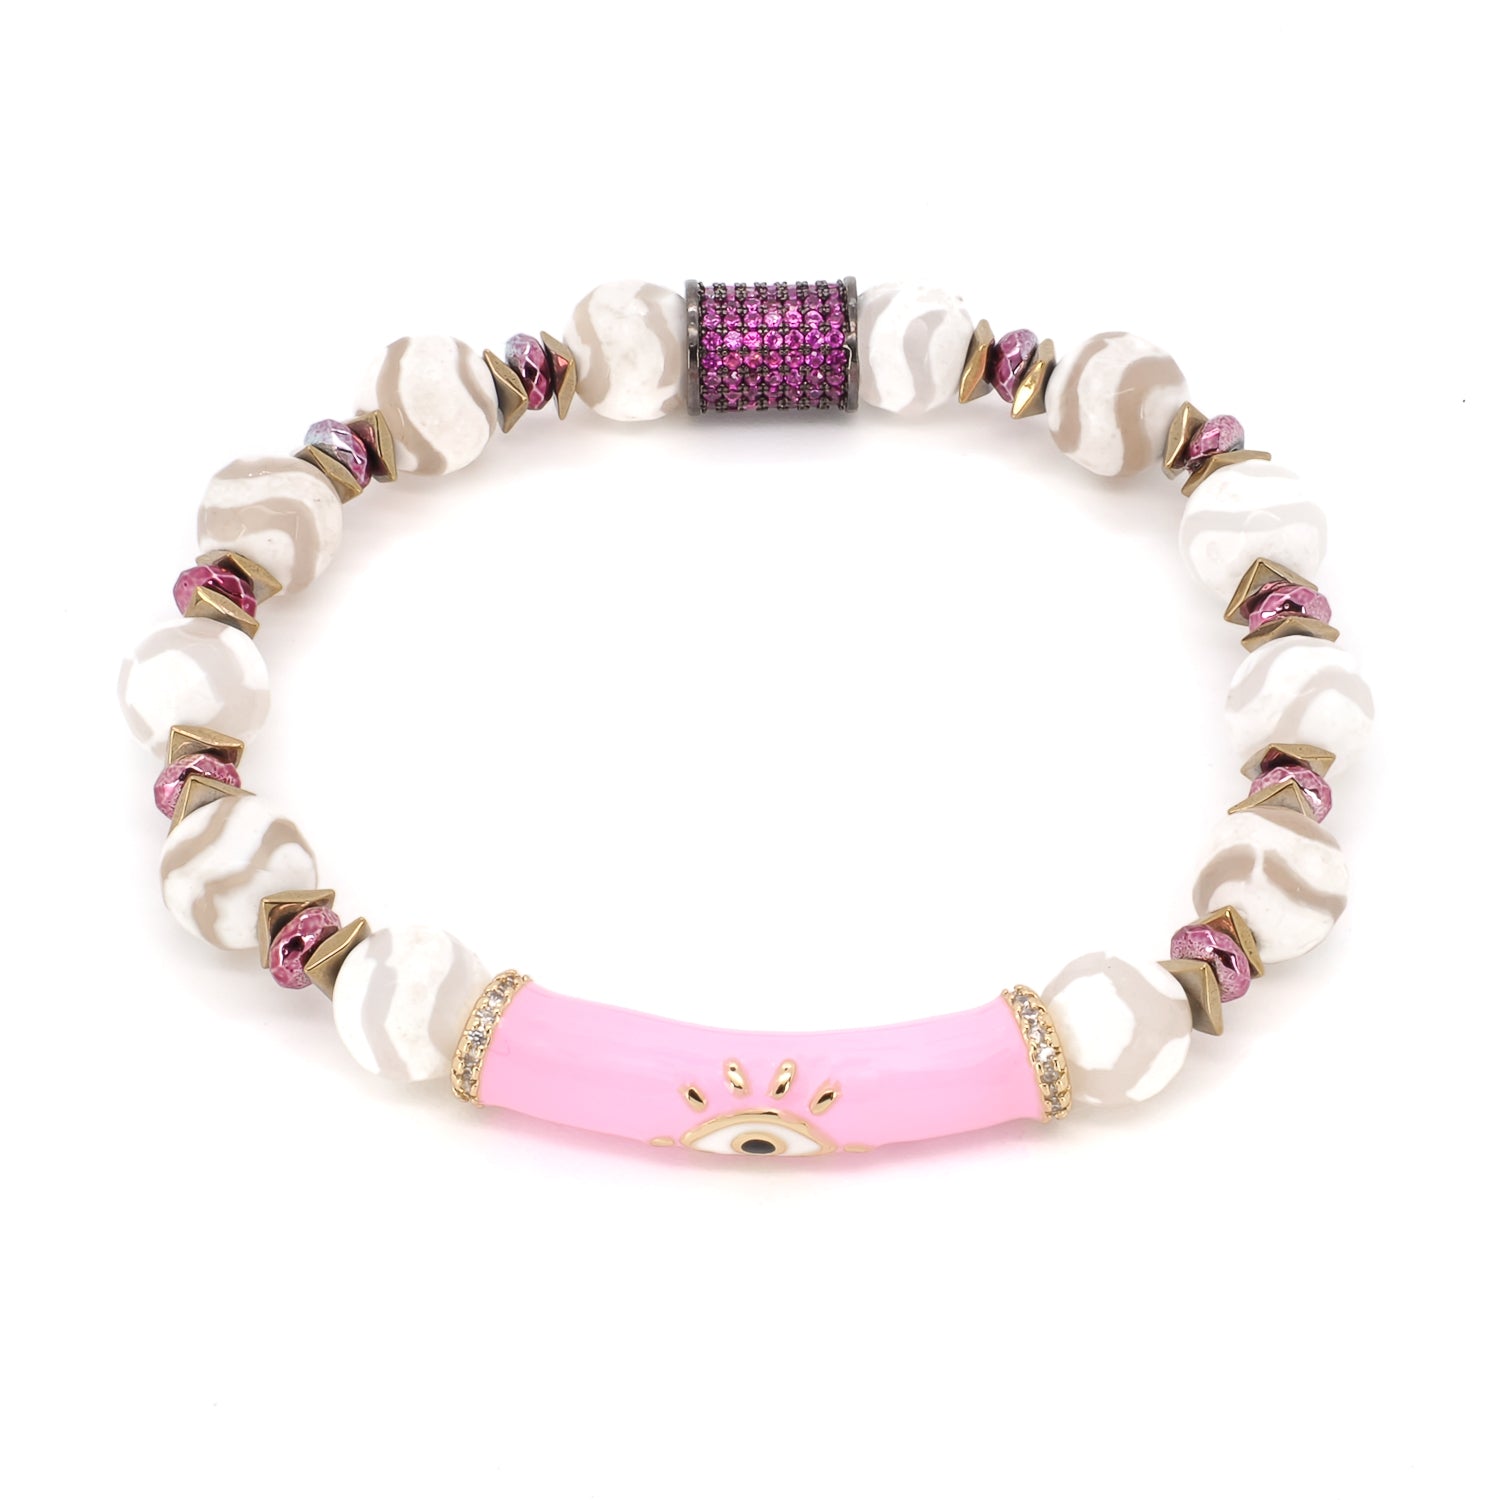 Experience the beauty and protection of the Love Protection Bracelet, adorned with Nepal Agate stone beads and an 18k gold plated evil eye charm.